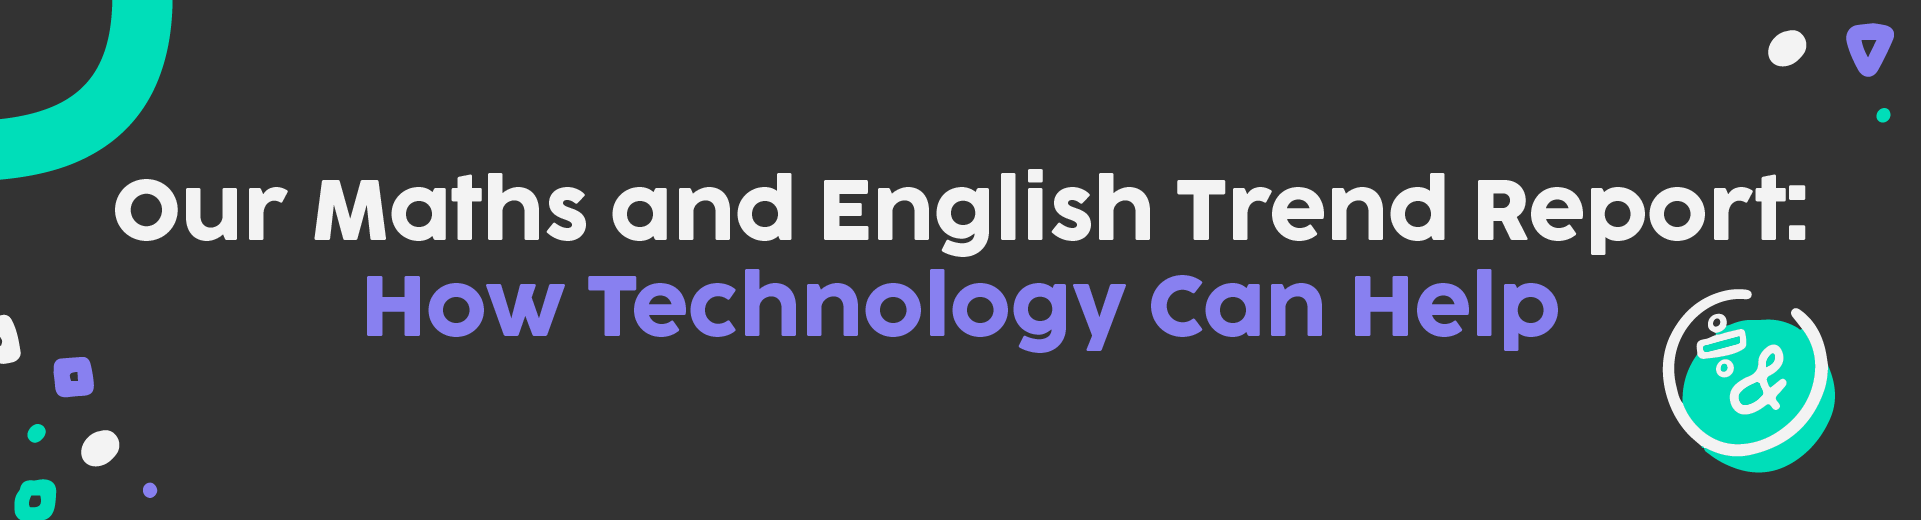 Our Maths and English Trend Report: How Technology can Help